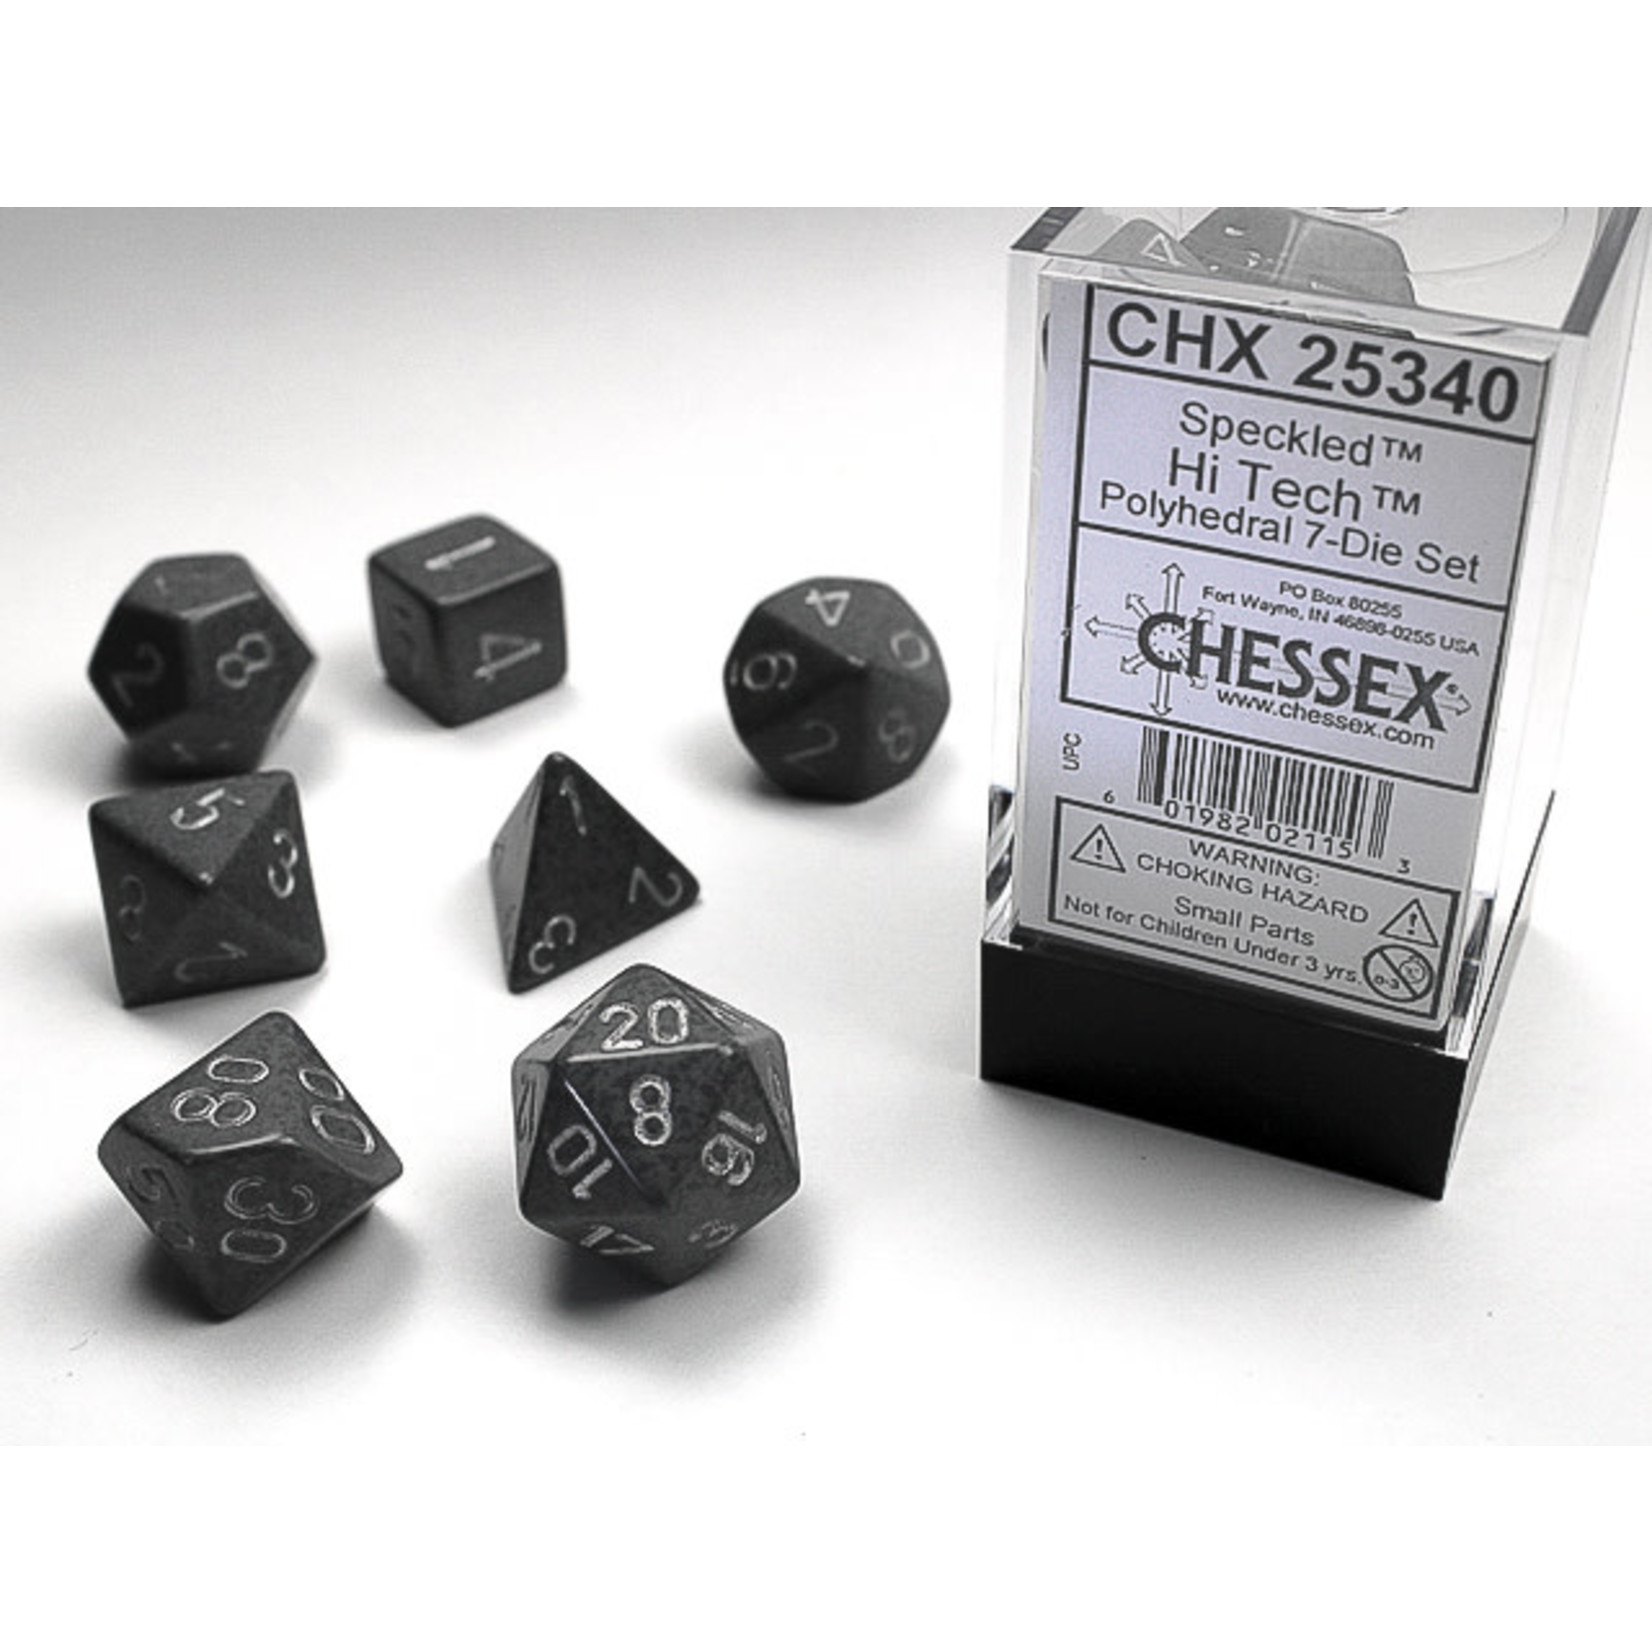 Chessex Dice RPG 25340 7pc Speckled Hi-Tech